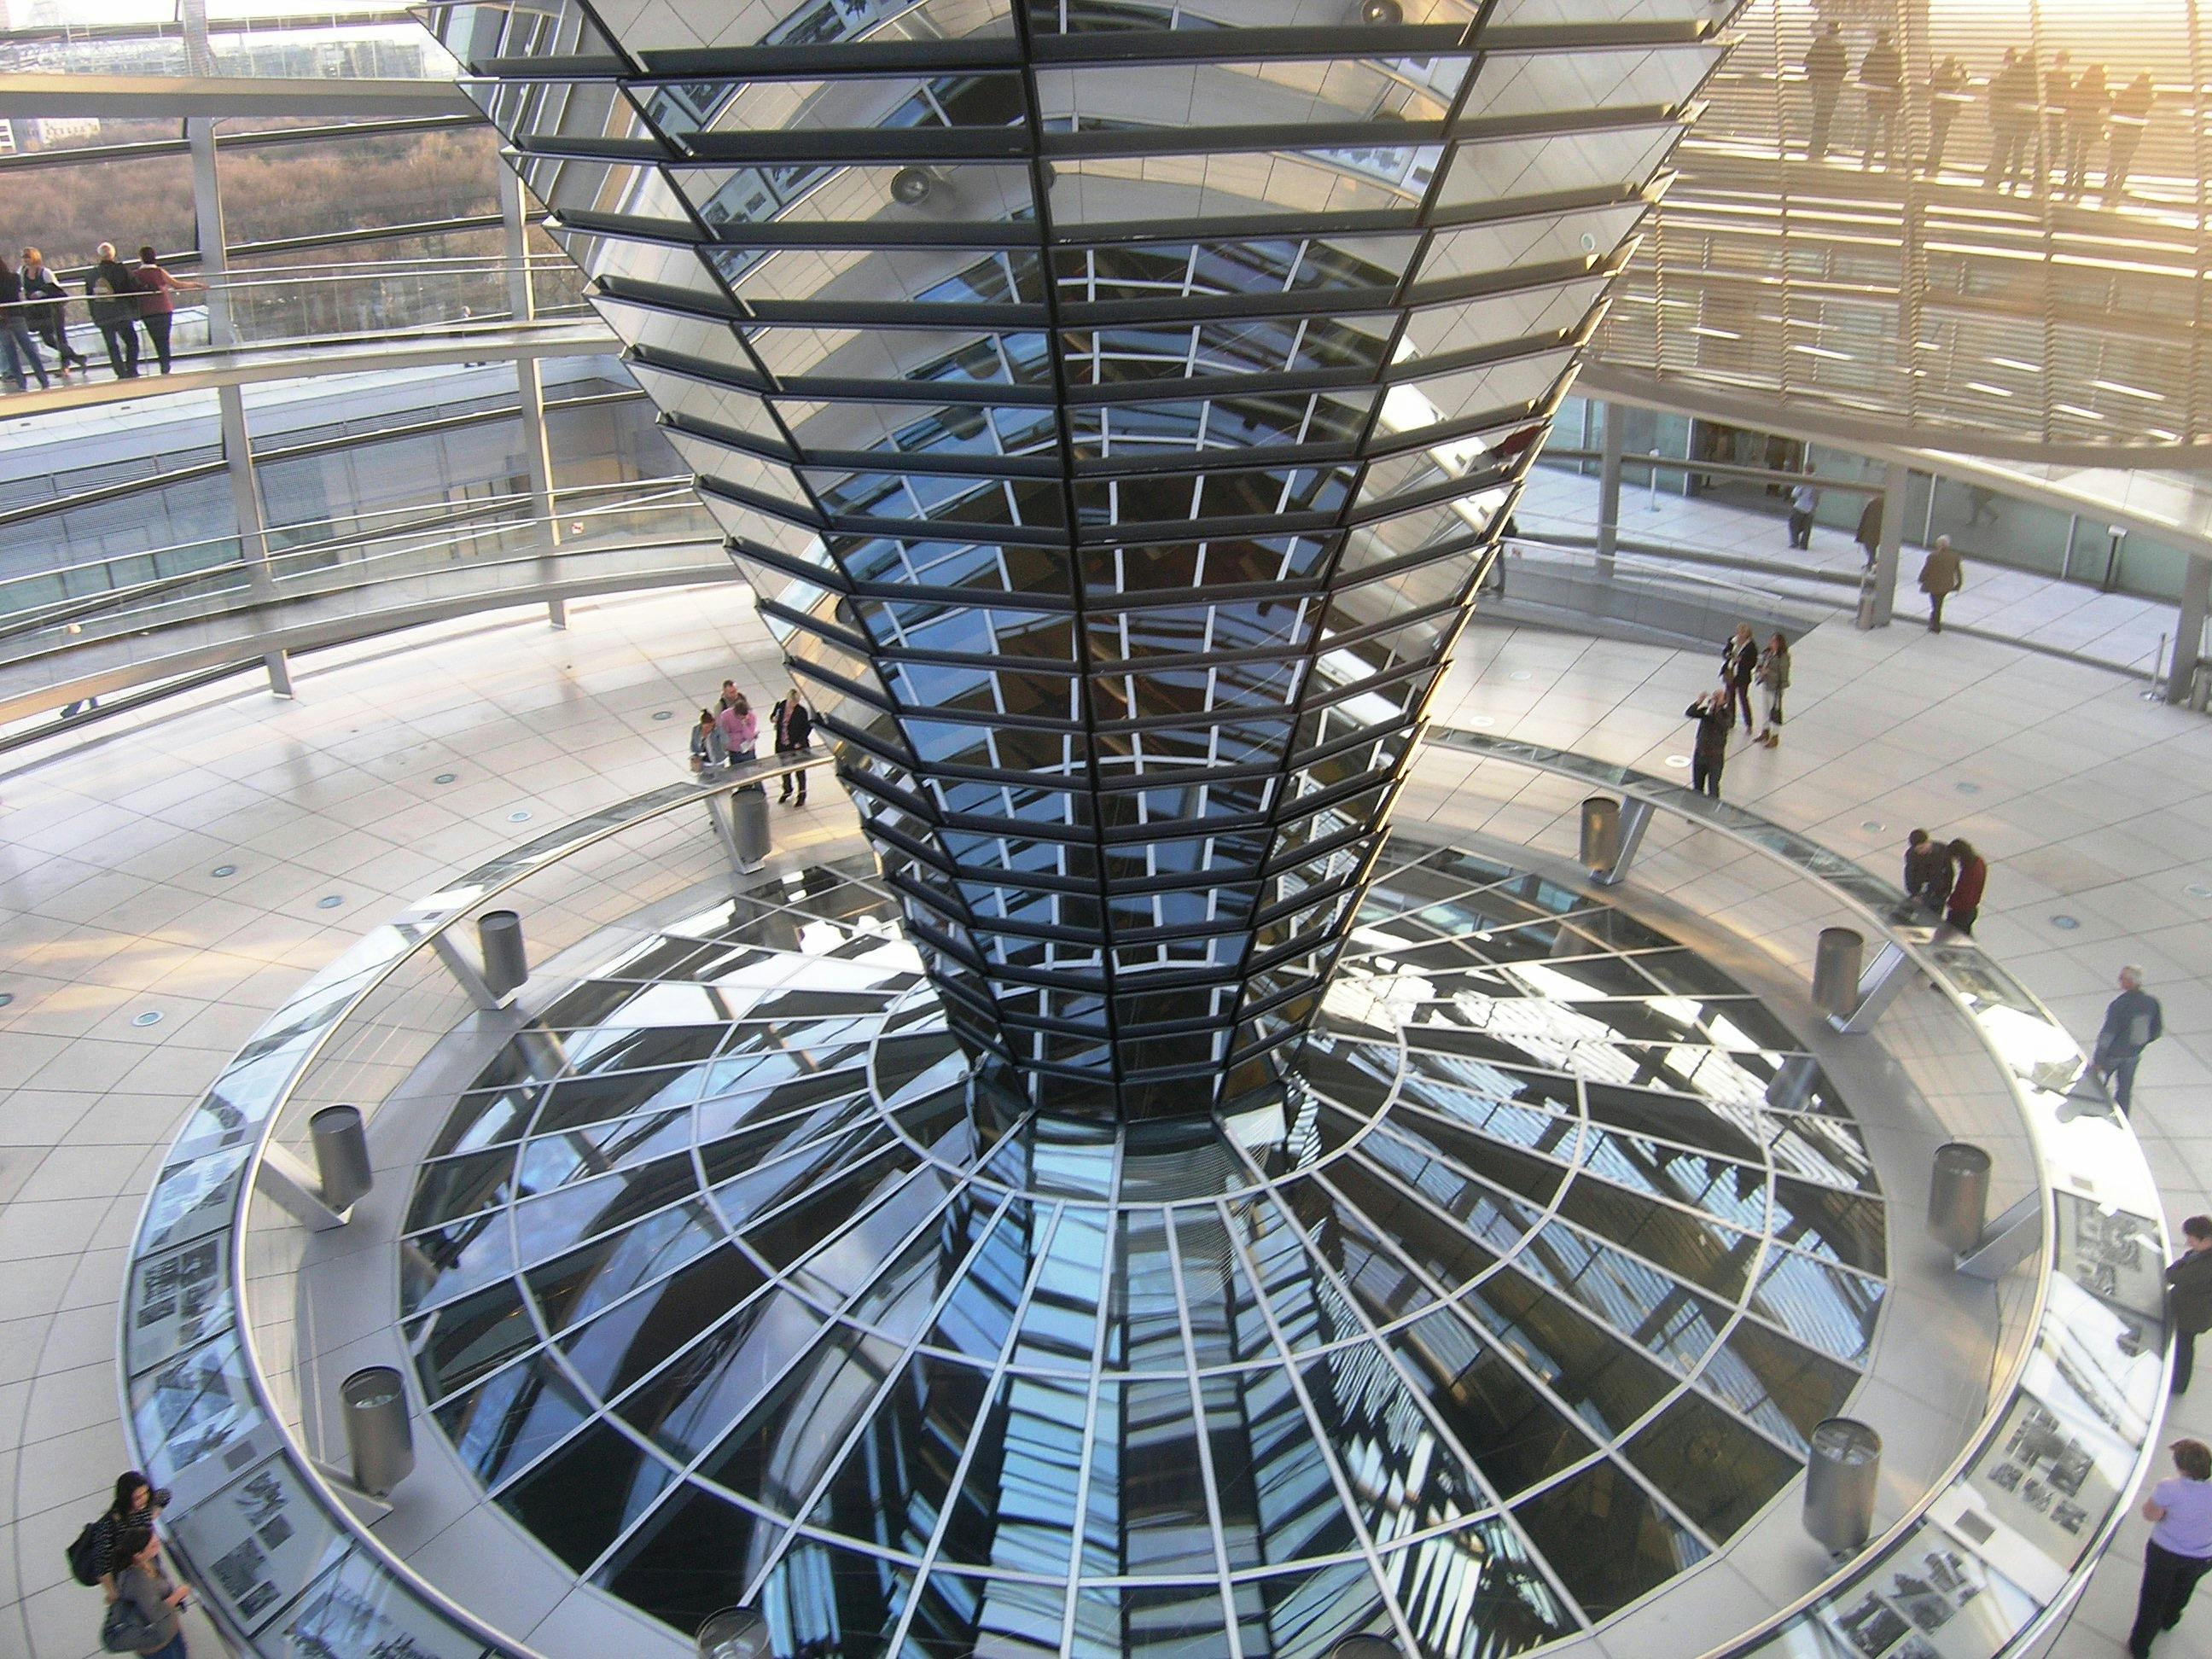 Berlin Reichstag tour in German with a visit inside the building